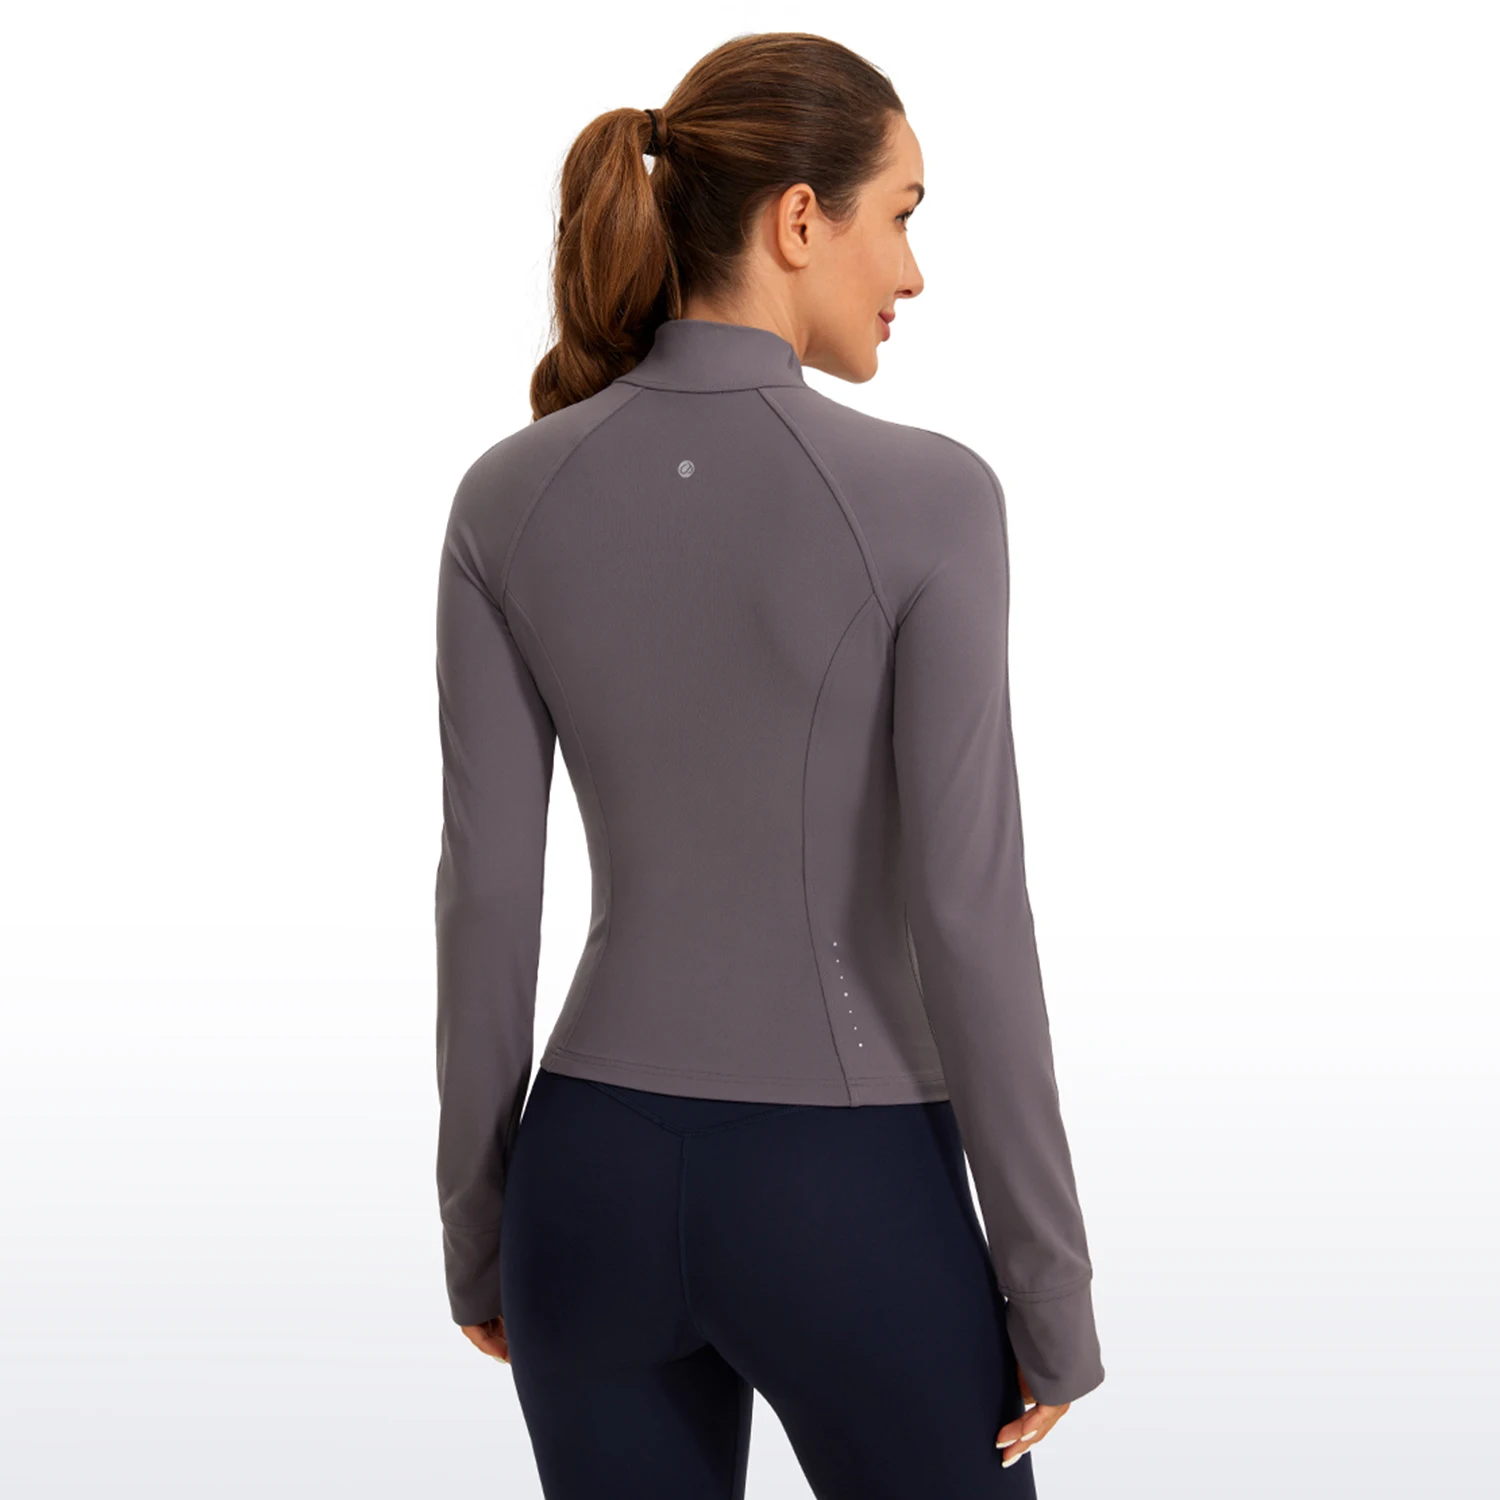 https://ae01.alicdn.com/kf/S8da2d6b8ee8046a692ac772e64407ad6z/CRZ-YOGA-Winter-Butterluxe-Womens-Cropped-Slim-Fit-Workout-Jackets-Weightless-Track-Athletic-Full-Zip-Jacket.jpg